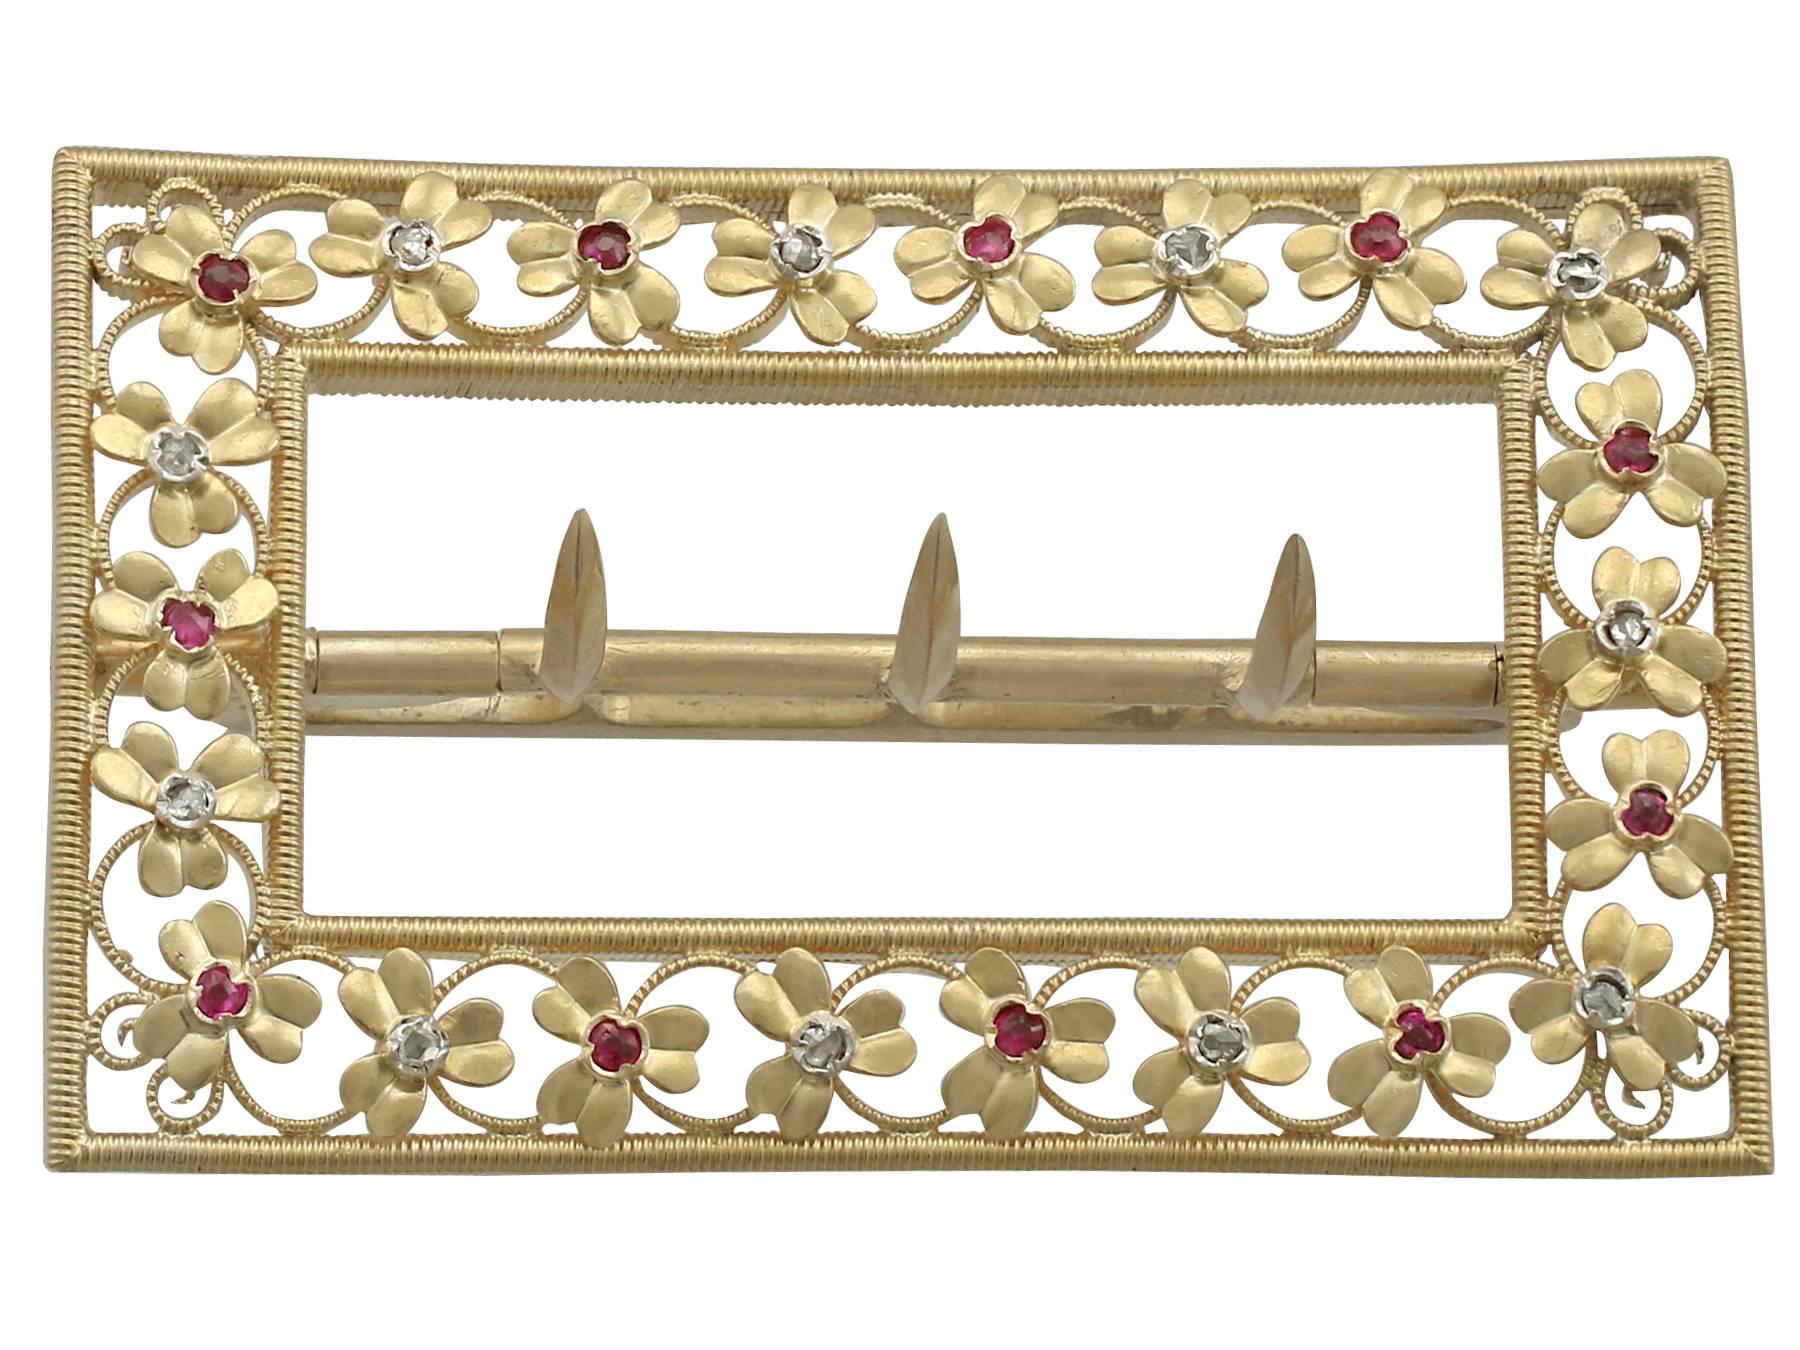 An exceptional Victorian 0.19 carat ruby and 0.18 carat diamond, 20 karat yellow gold belt buckle; part of our diverse antique jewelry and estate jewelry collections.

This exceptional Victorian belt buckle has been crafted in 20k yellow gold.

The